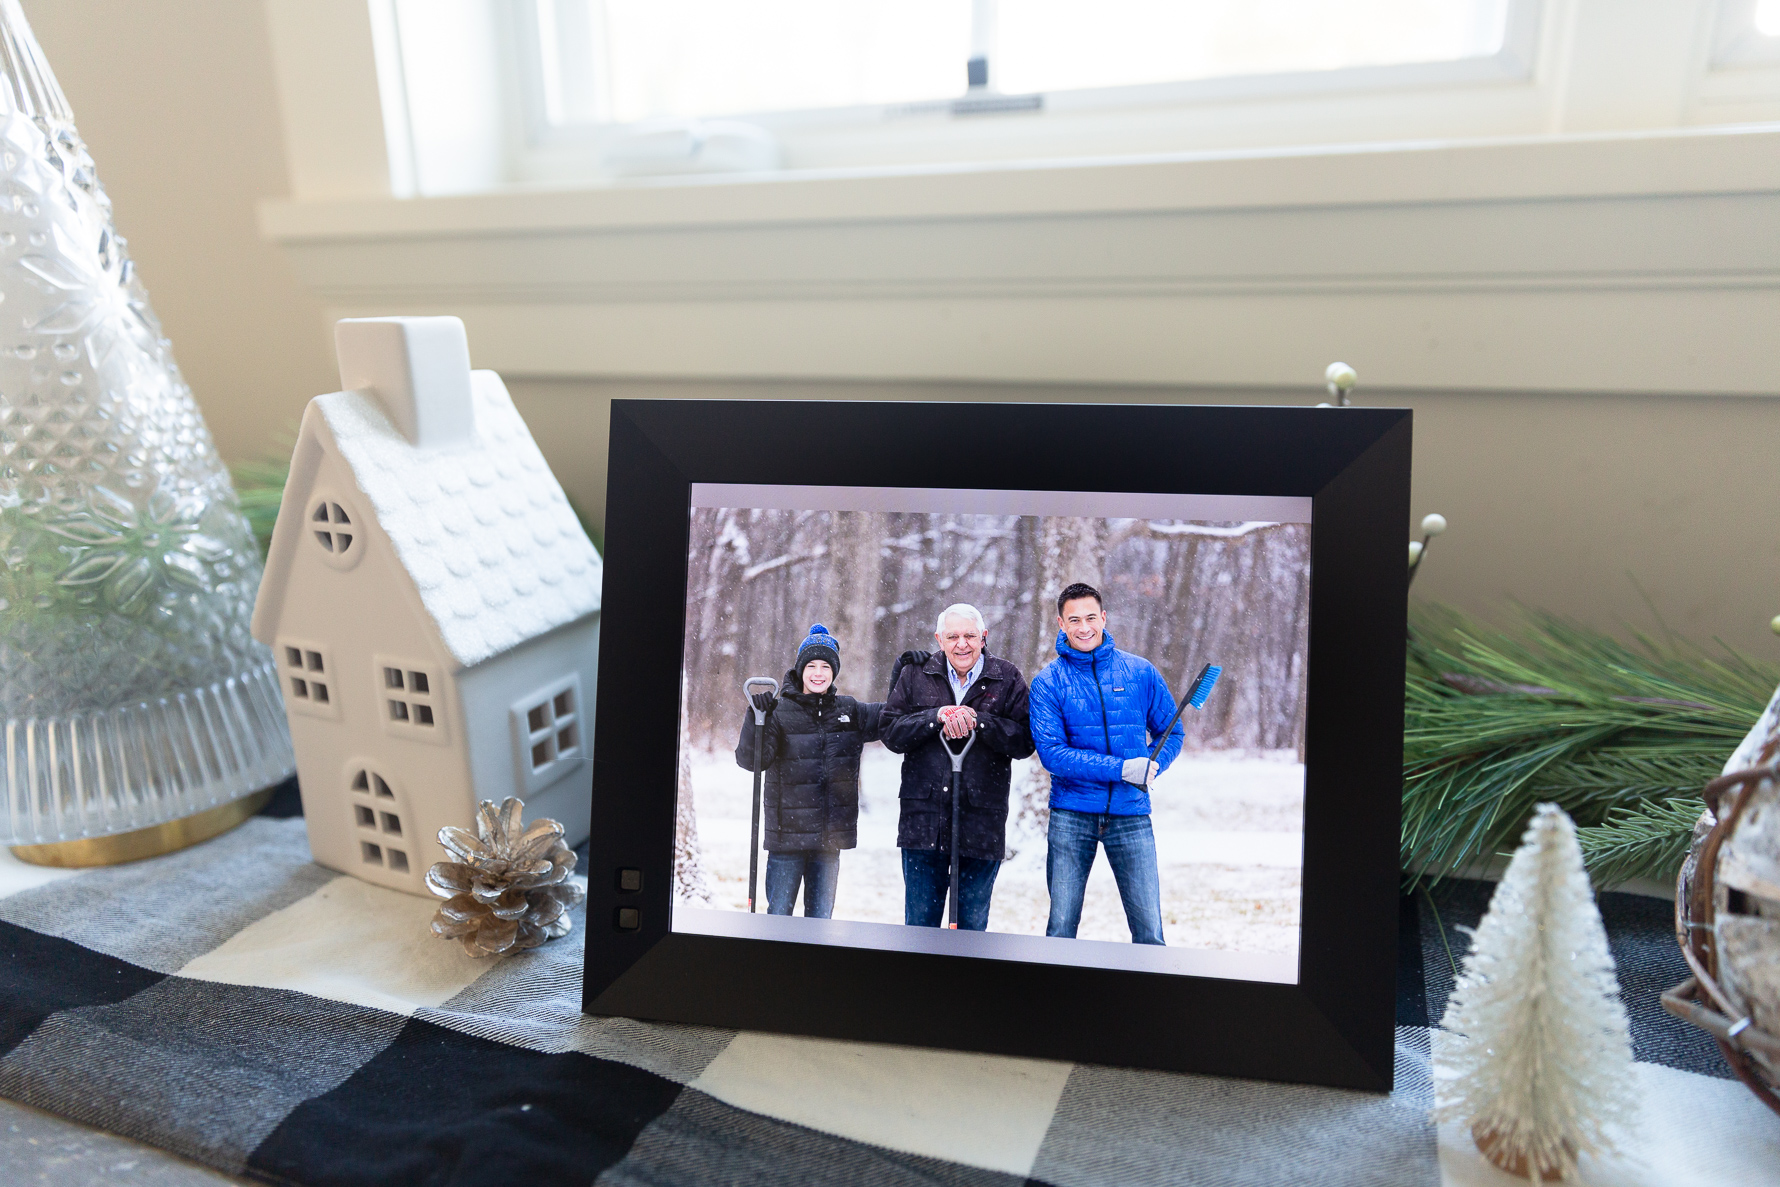 Digital Photo Frame :: The Perfect Holiday Gift!